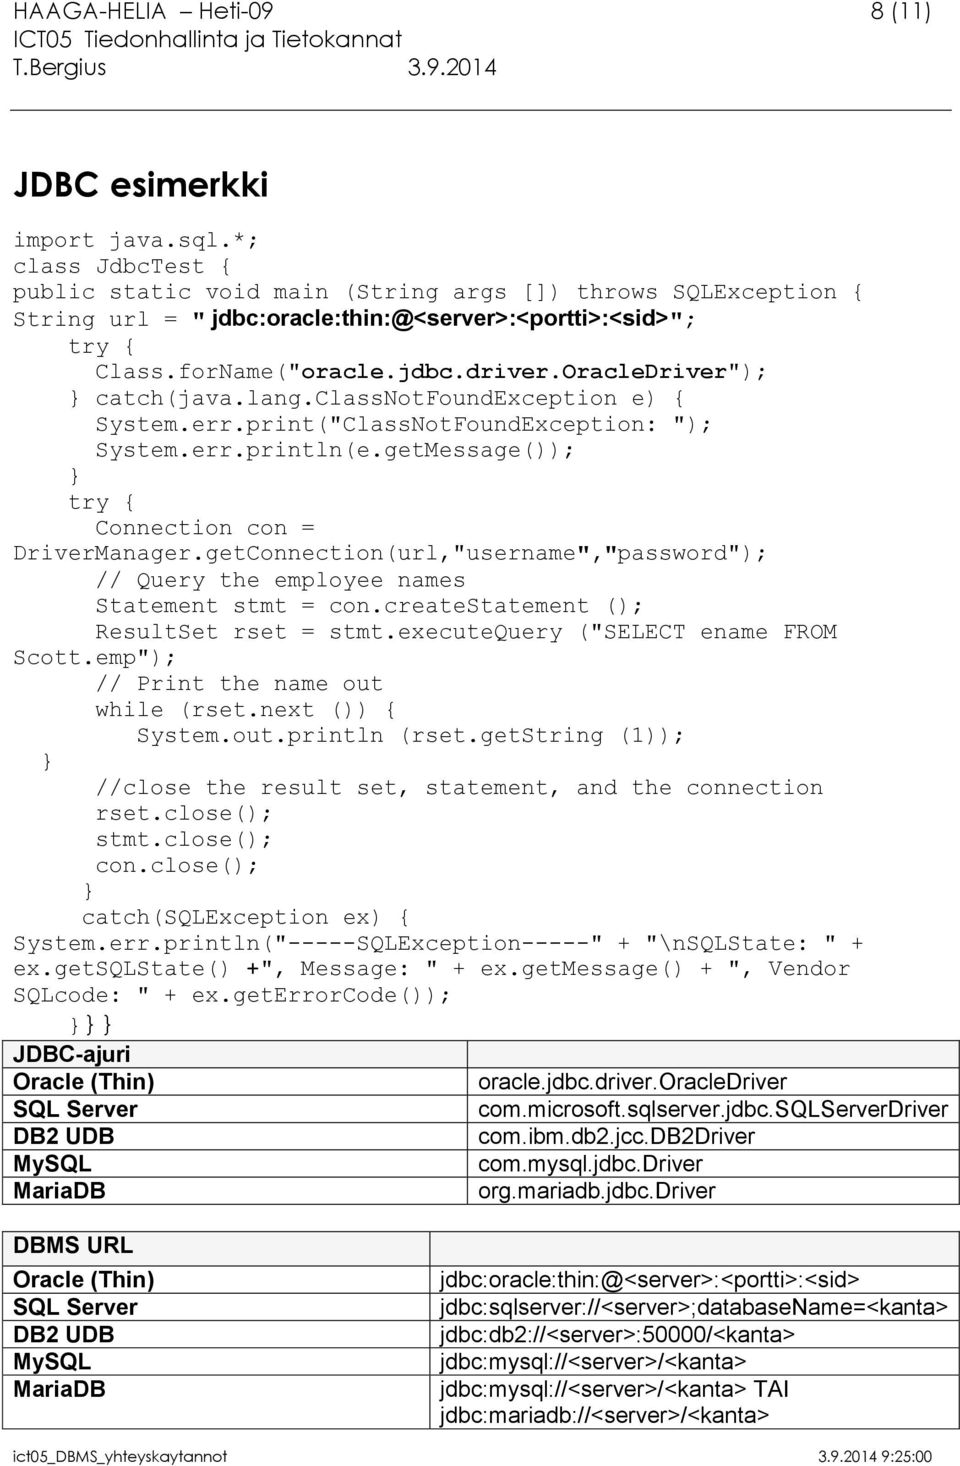 OracleDriver"); } catch(java.lang.classnotfoundexception e) { System.err.print("ClassNotFoundException: "); System.err.println(e.getMessage()); } try { Connection con = DriverManager.